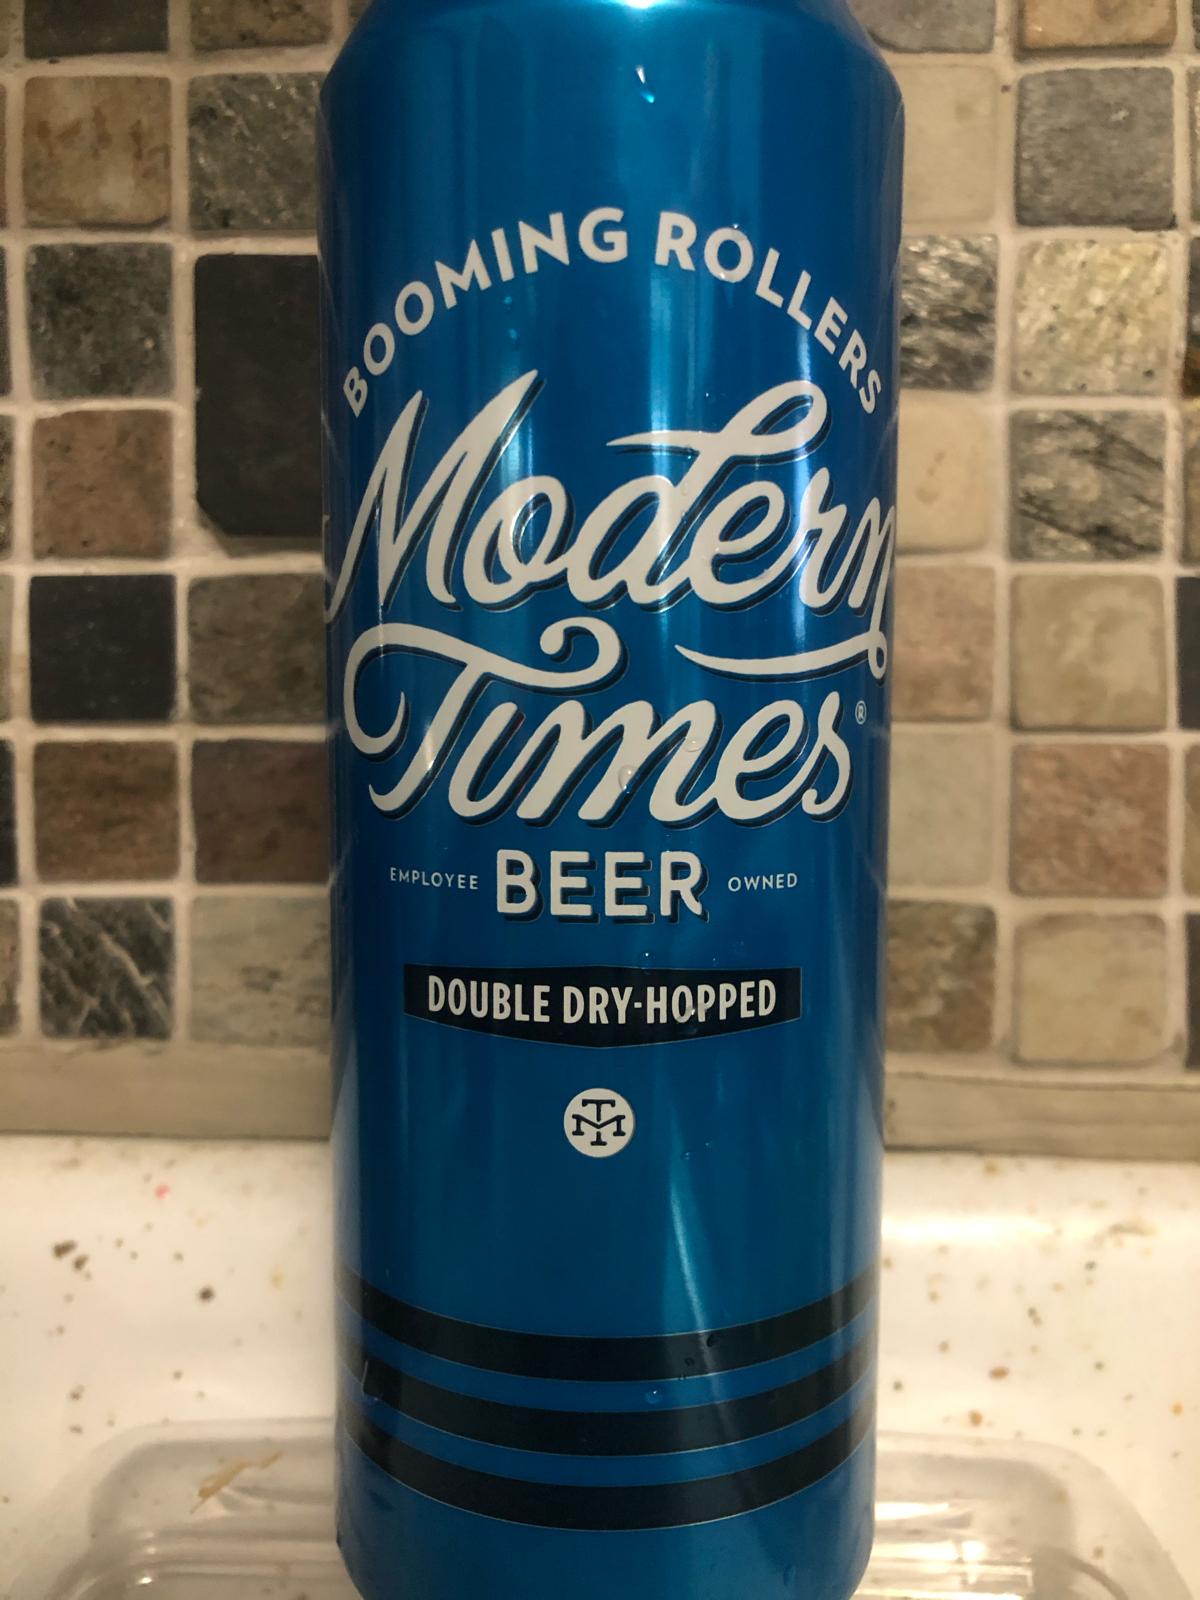 Booming Rollers DDH